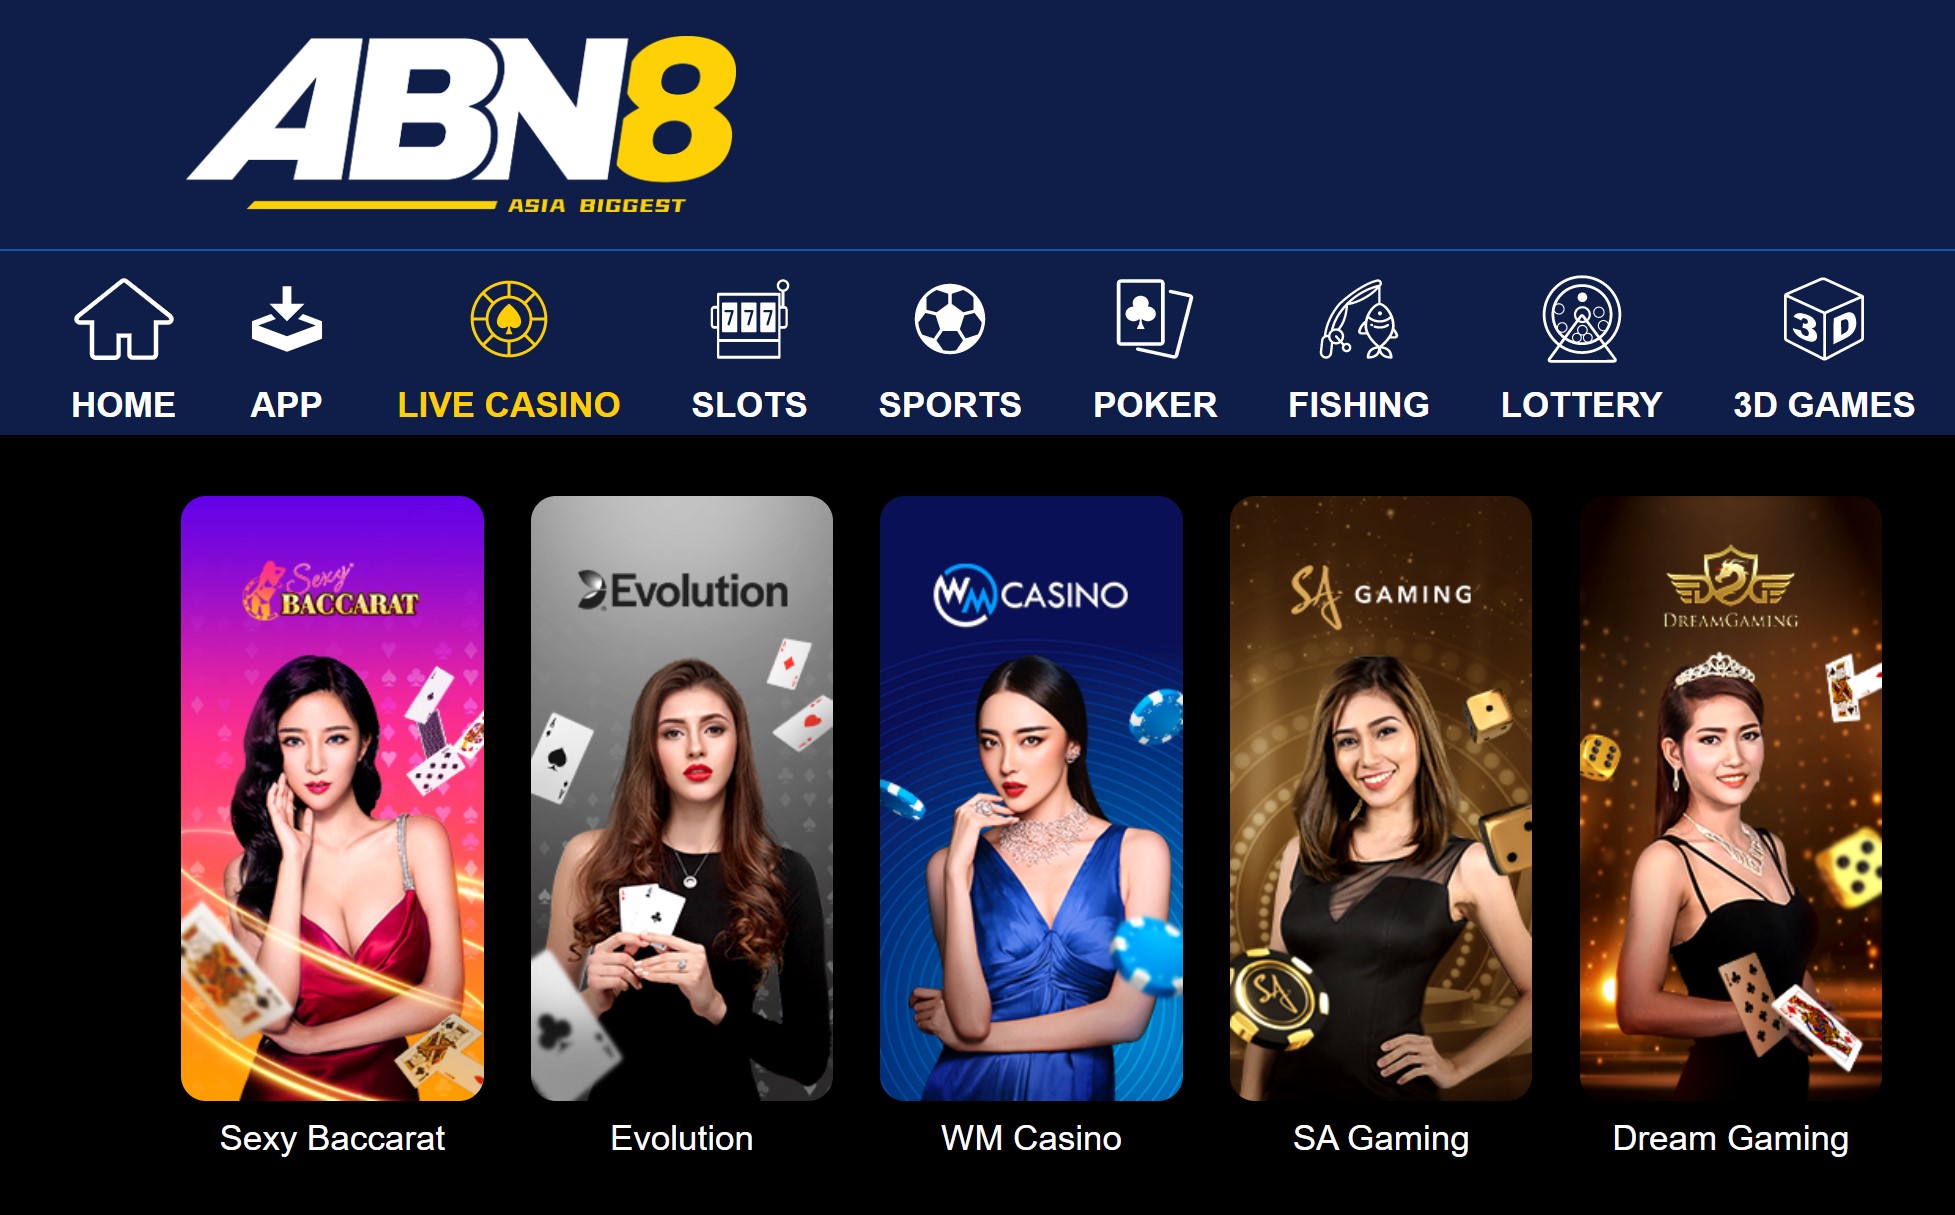 Example Of ABN8 casino Singapore games